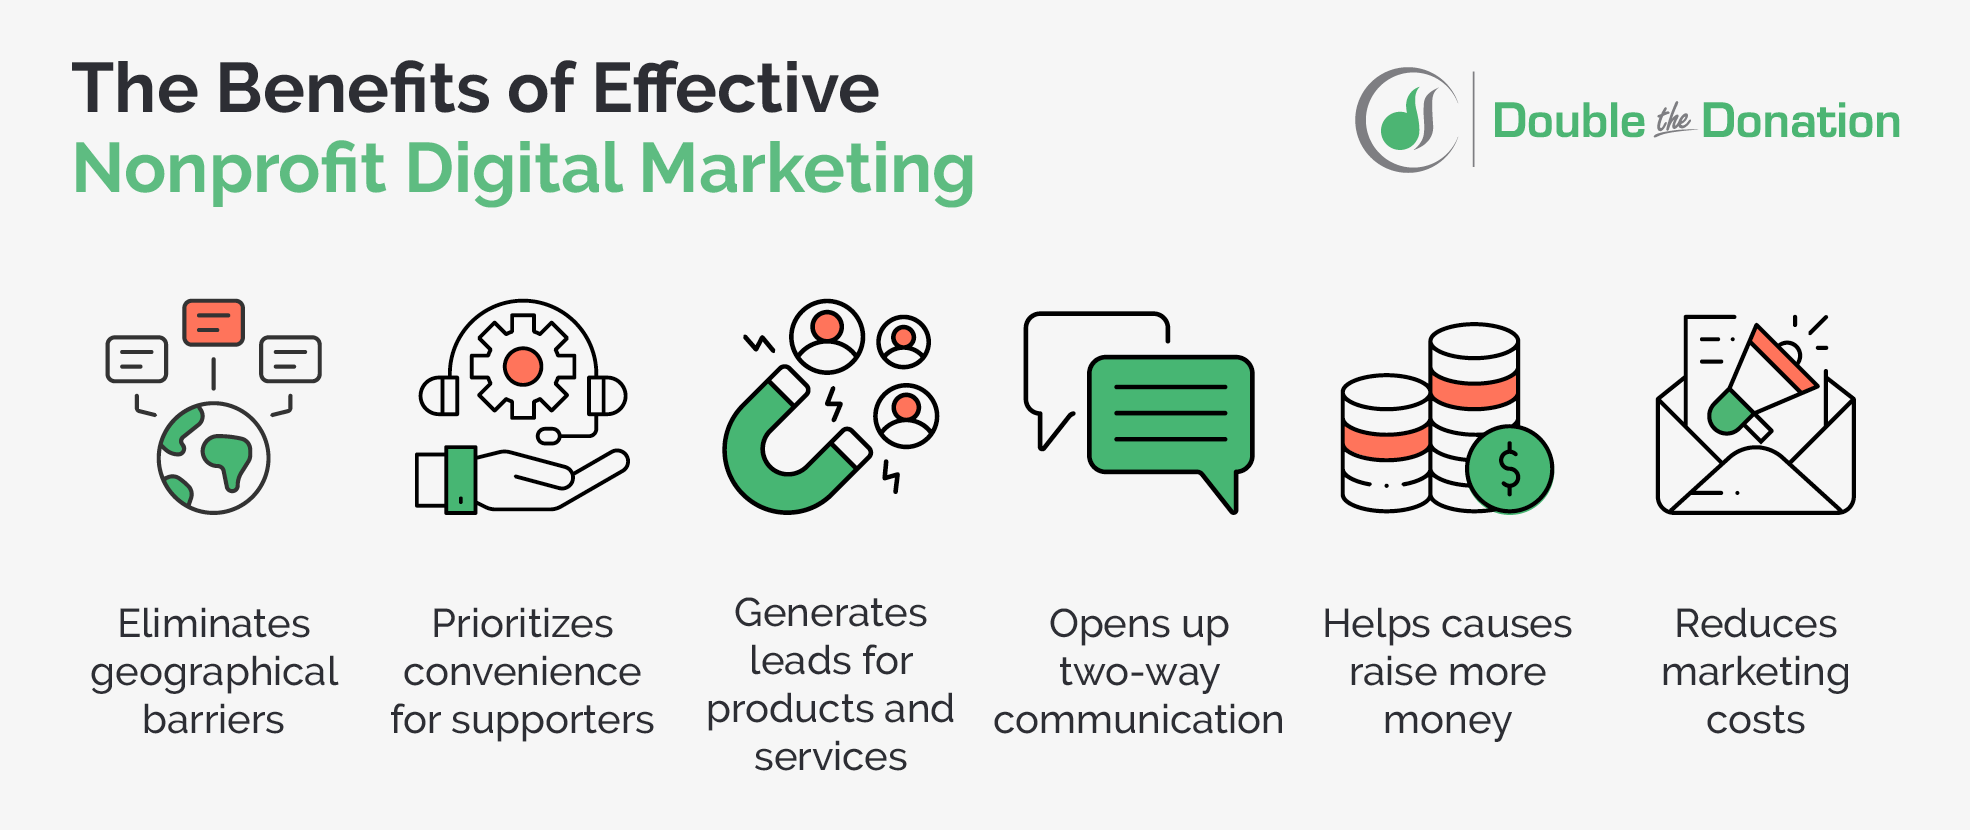 The benefits of digital marketing for nonprofits, listed below.